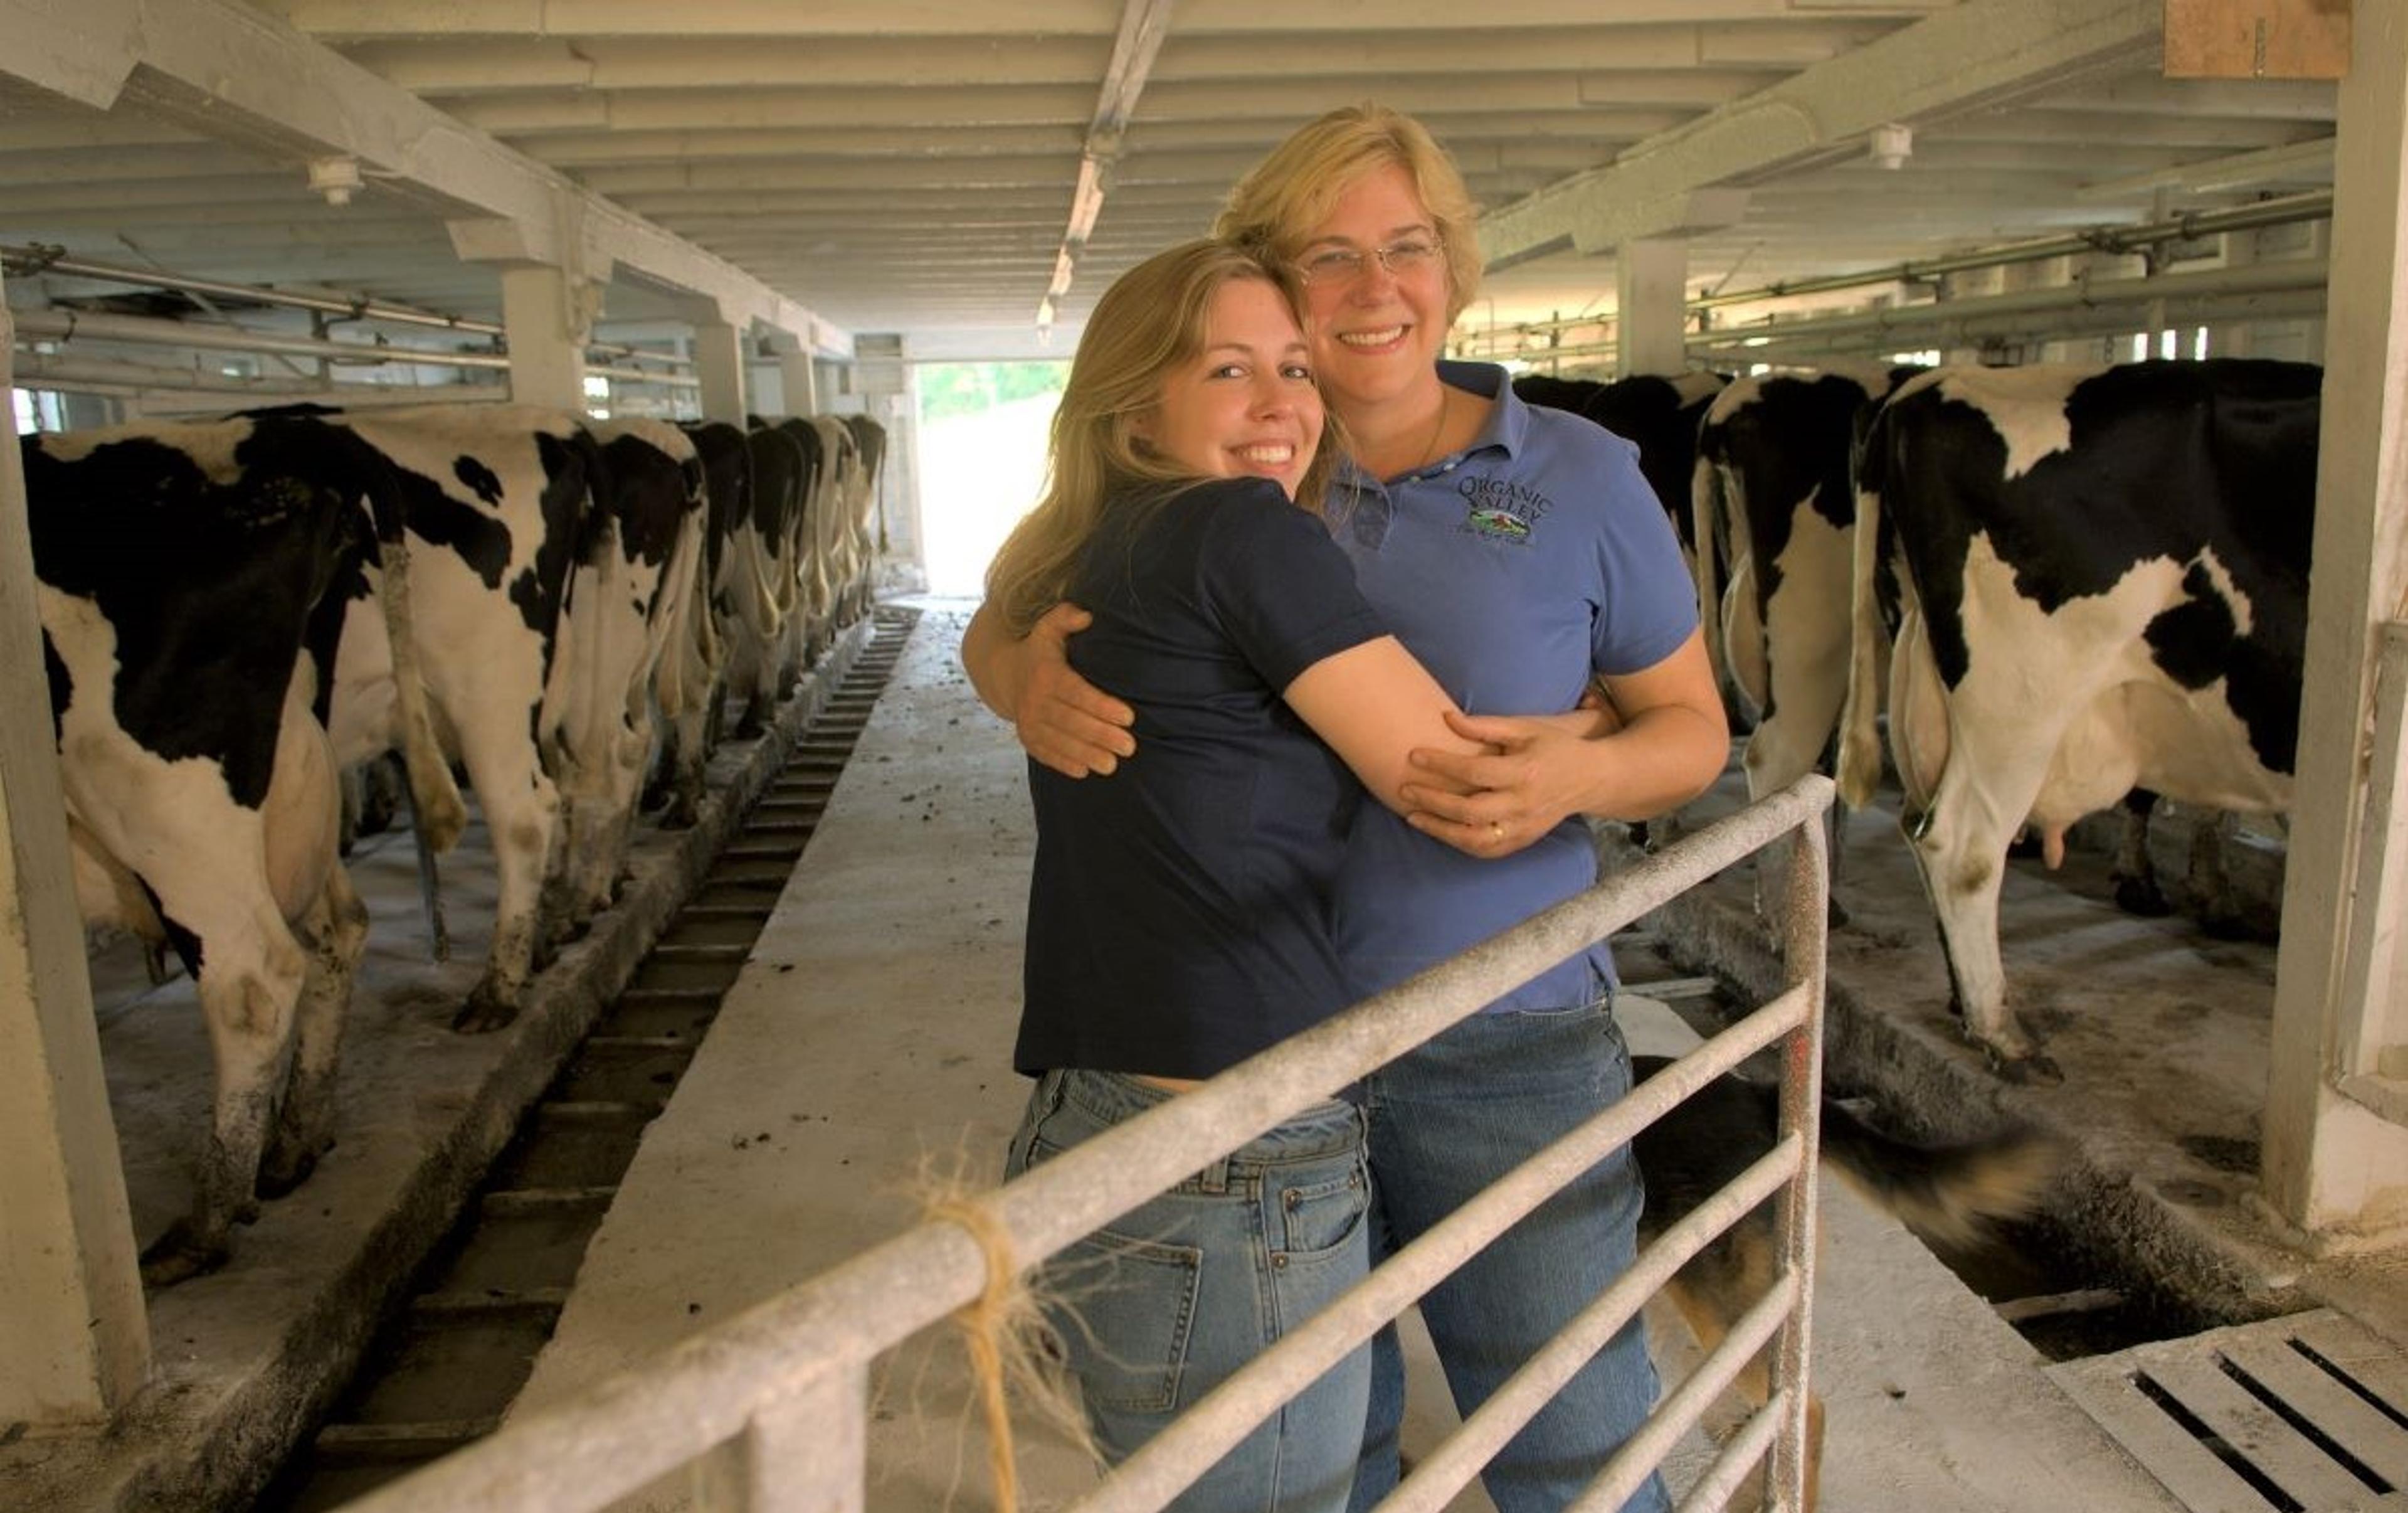 Kristina Ralph and her mother, Louise Hemstead, in the barn at their organic dairy farm.